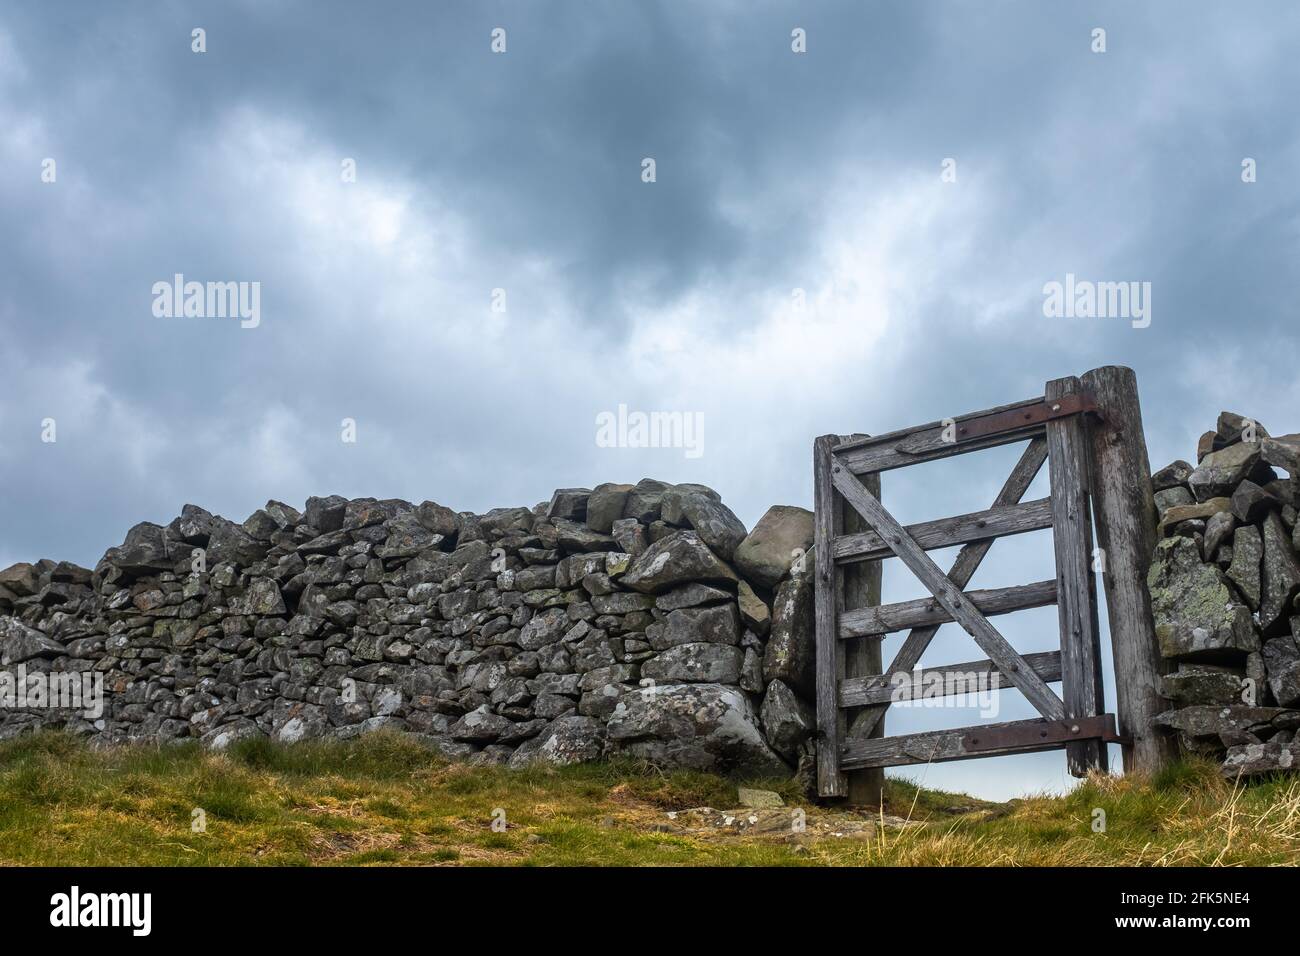 A Wooden Gate In An Old Dry Stone Wall In Scotland, With Copy Space Stock Photo